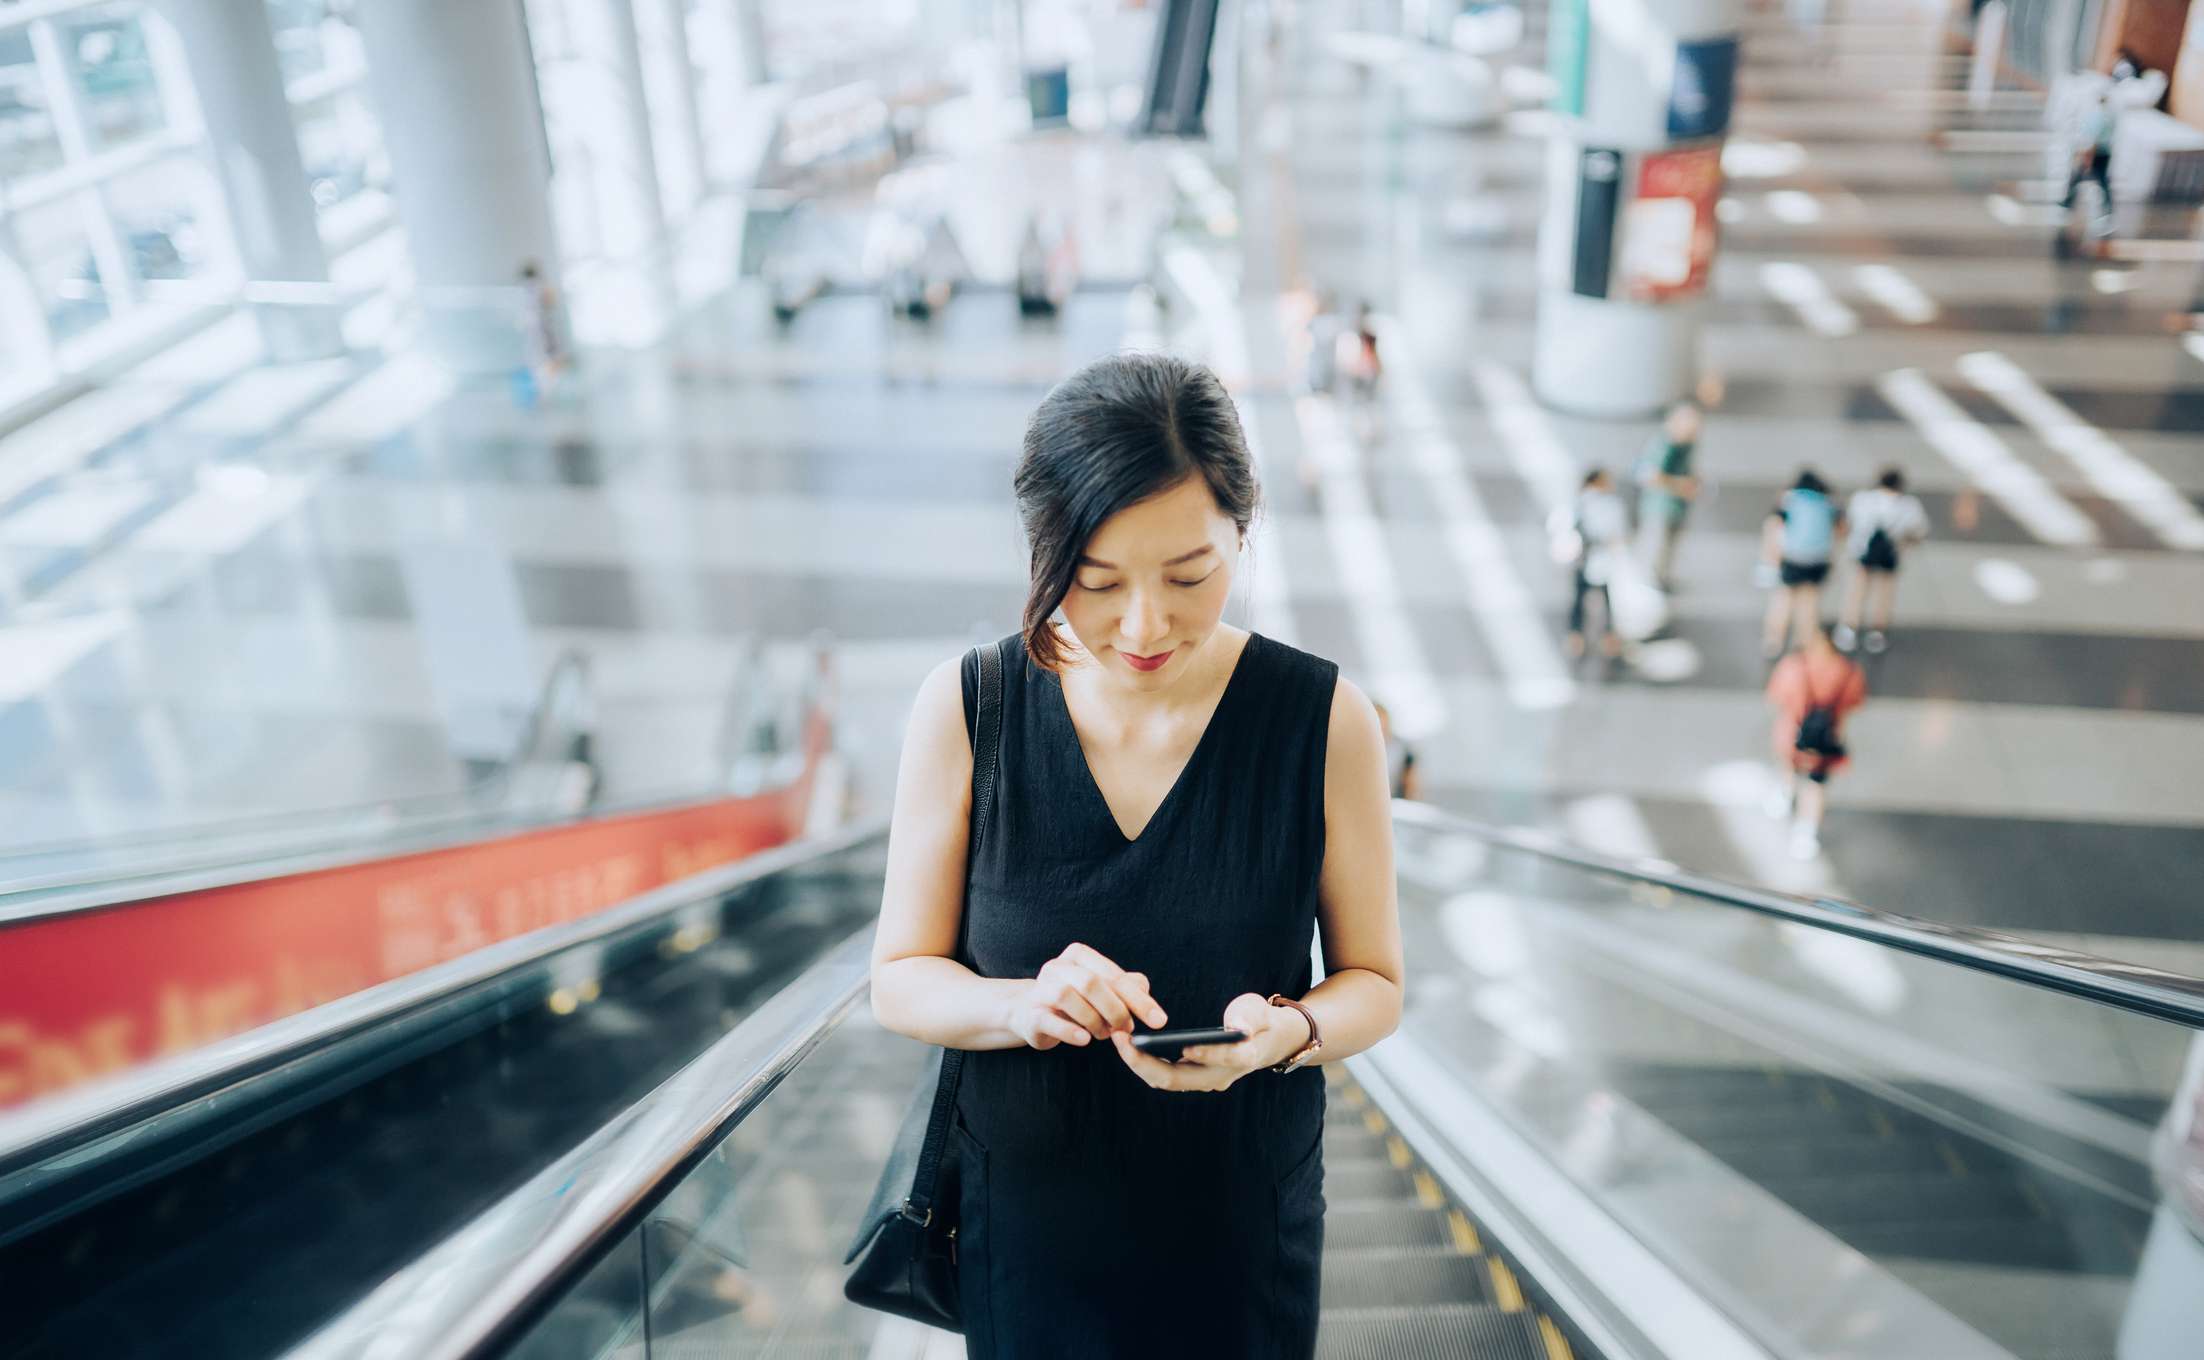 Woman looking at her phone while riding an escalator.